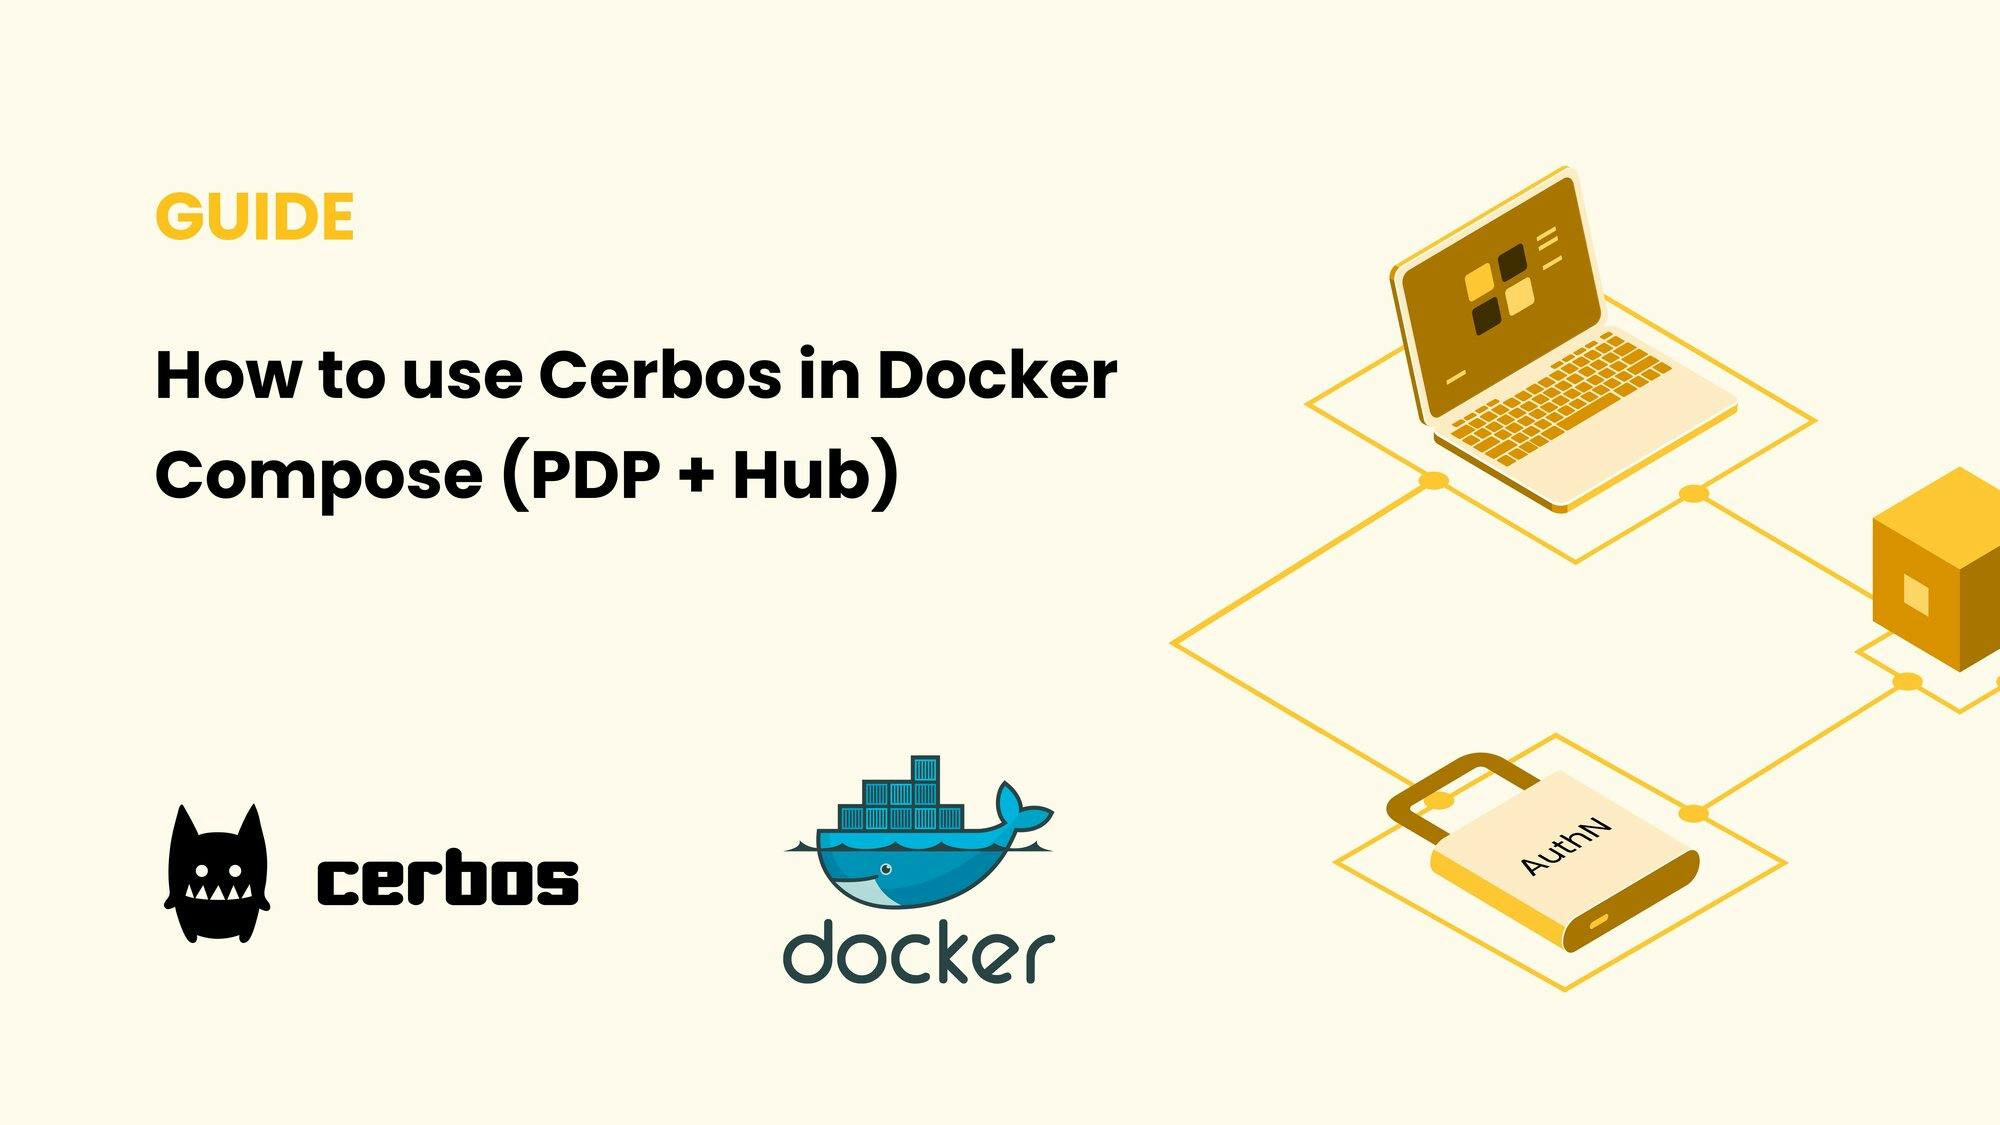 How to use Cerbos in Docker Compose (PDP + Hub)